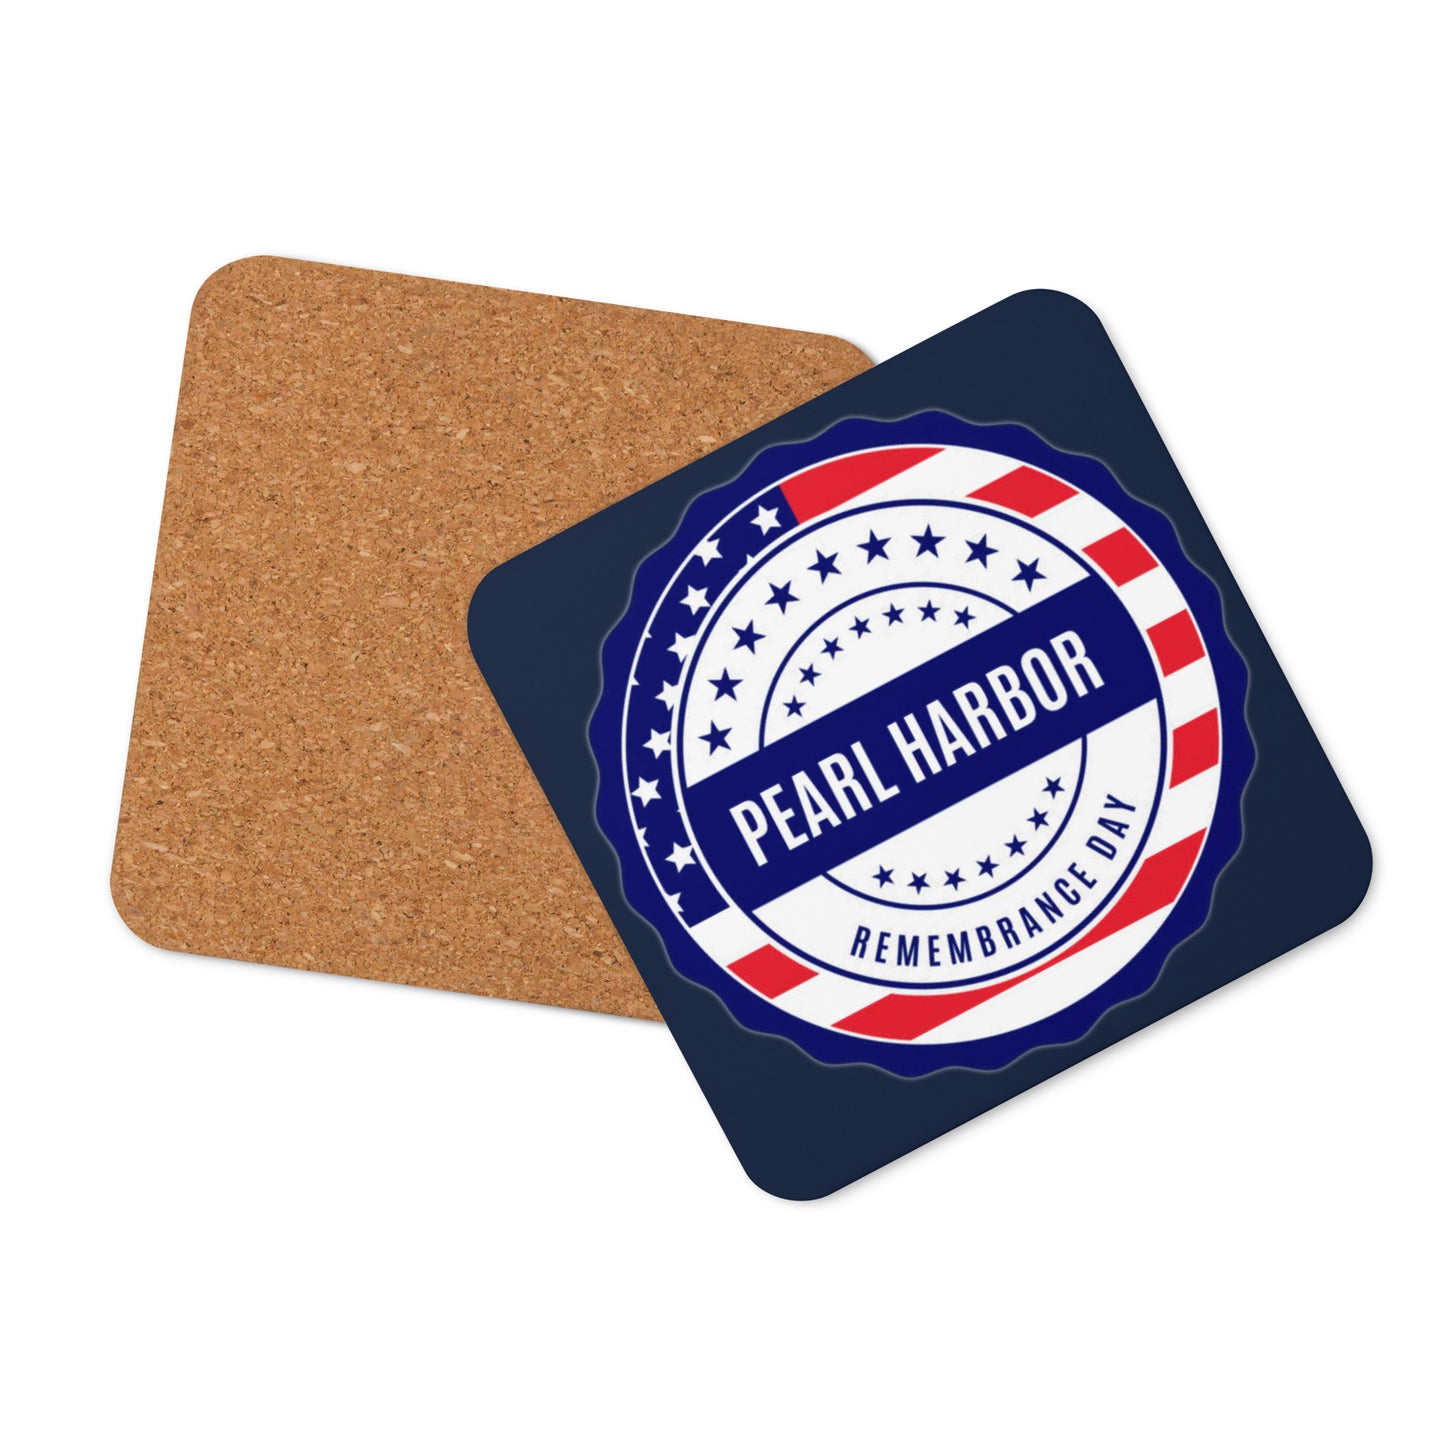 Cork-back coaster - Pearl Harbor Remembrance Day (Navy Blue)